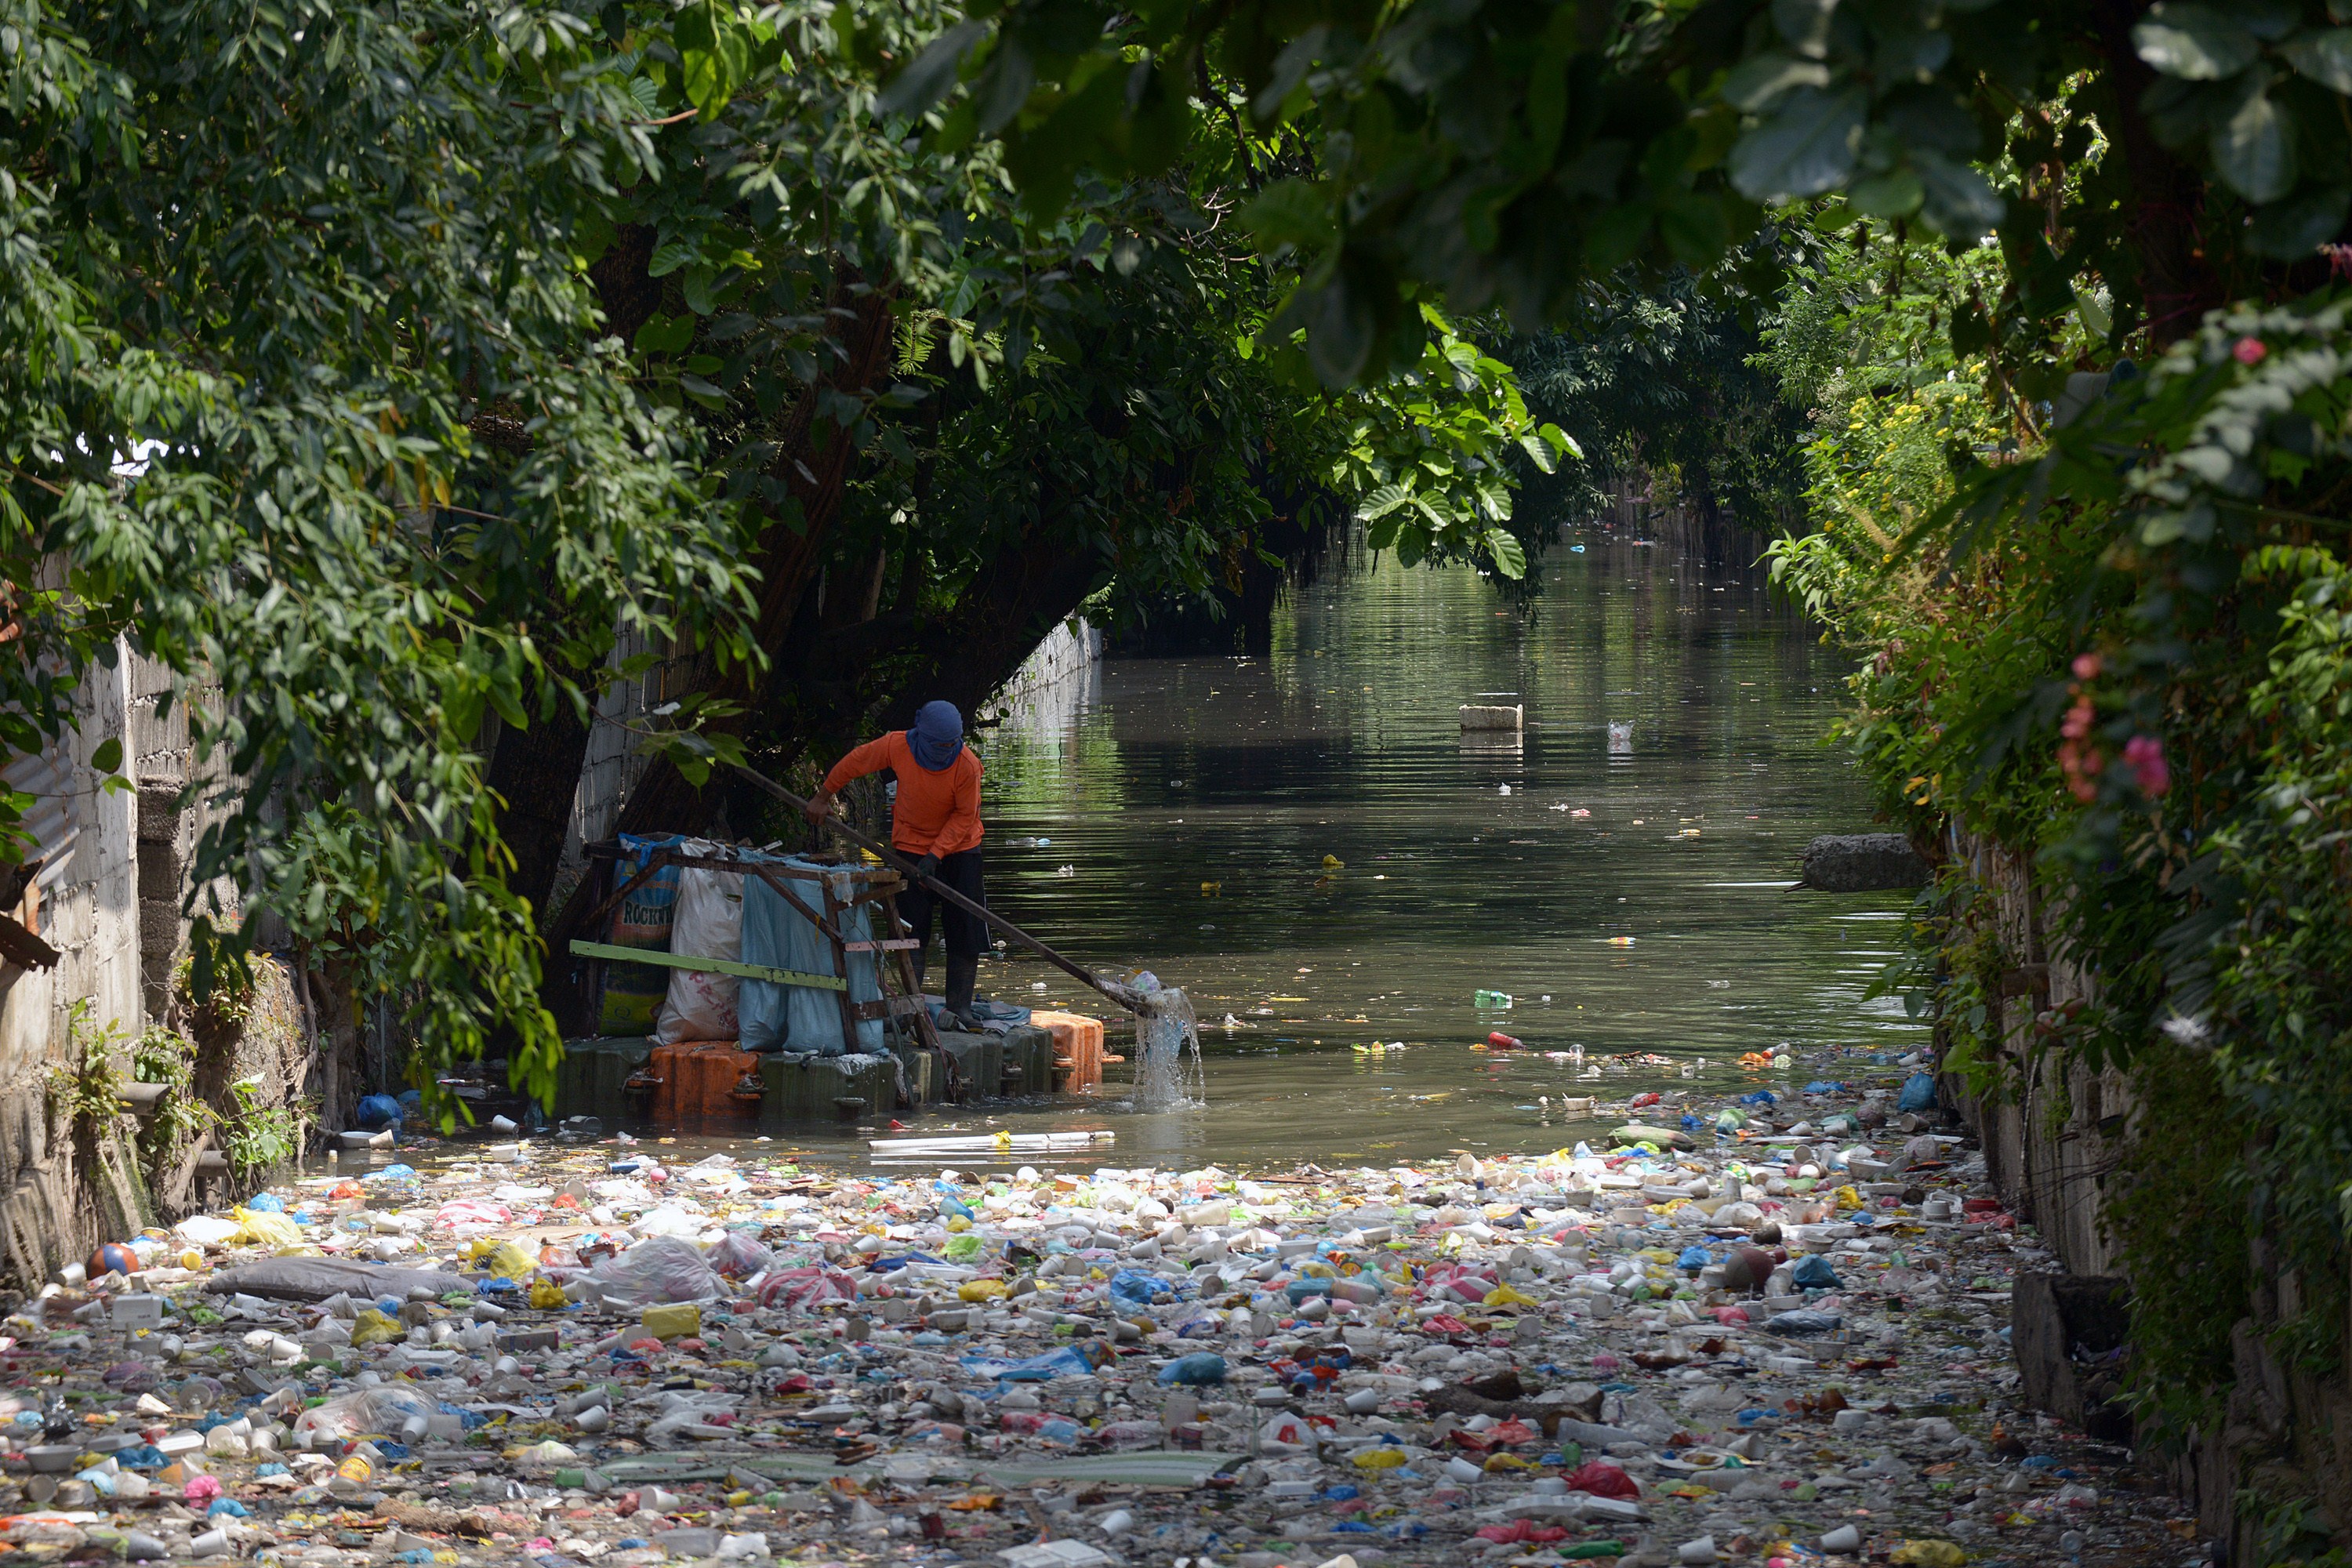 A clean-up volunteer scoops plastic waste at an open sewer in Manila on May 4, 2015. Non-governmental environmental groups are calling for national legislation to prevent plastic waste that clog waterways.